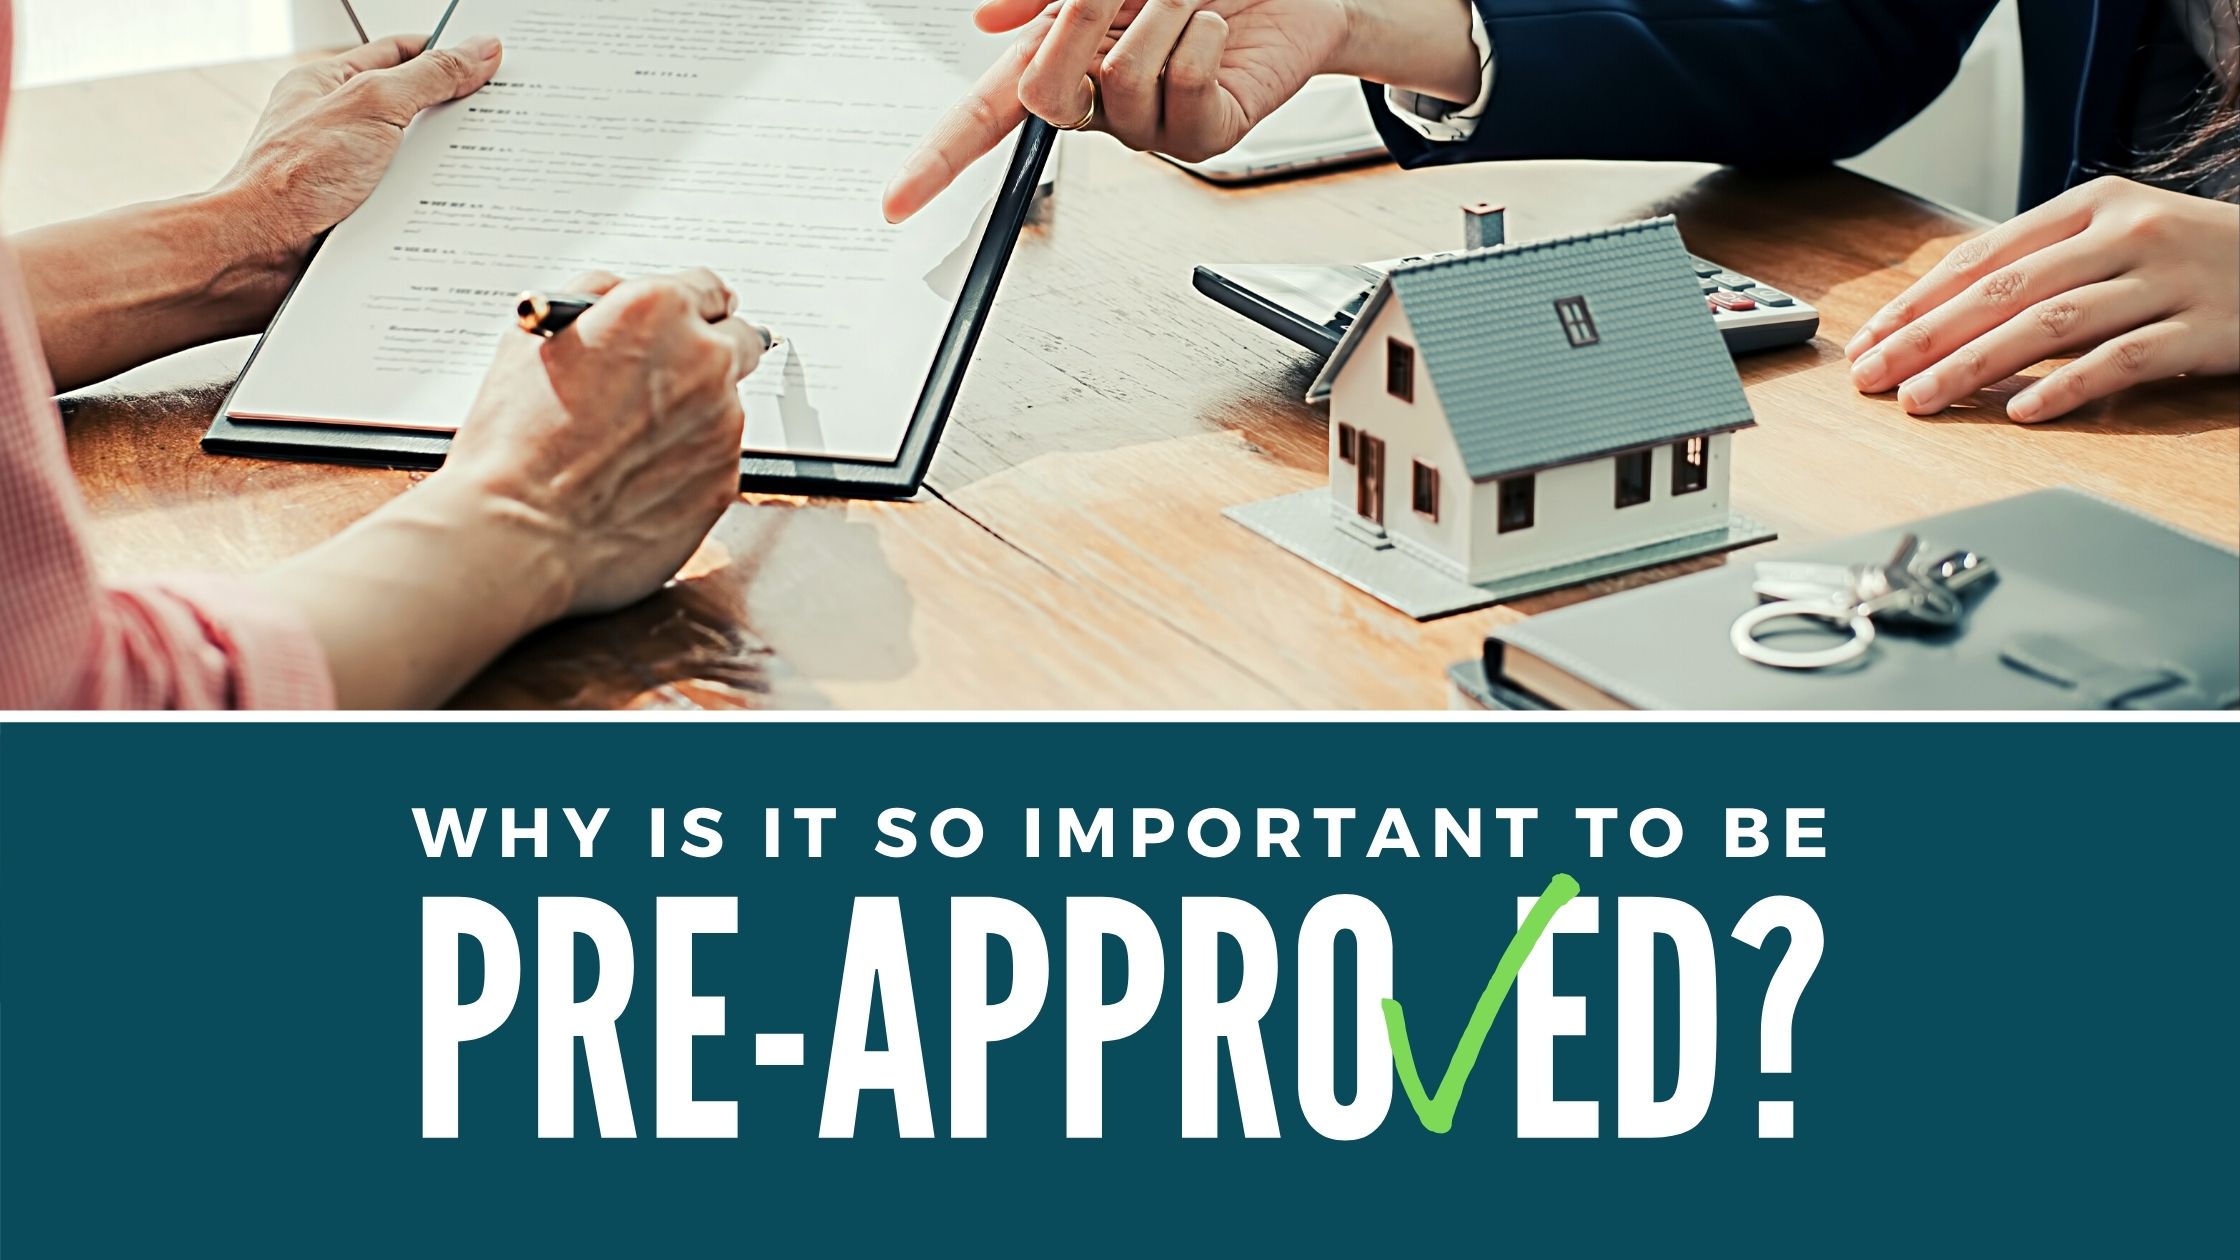 Loan Pre-Approval Process: A Step-by-Step Guide